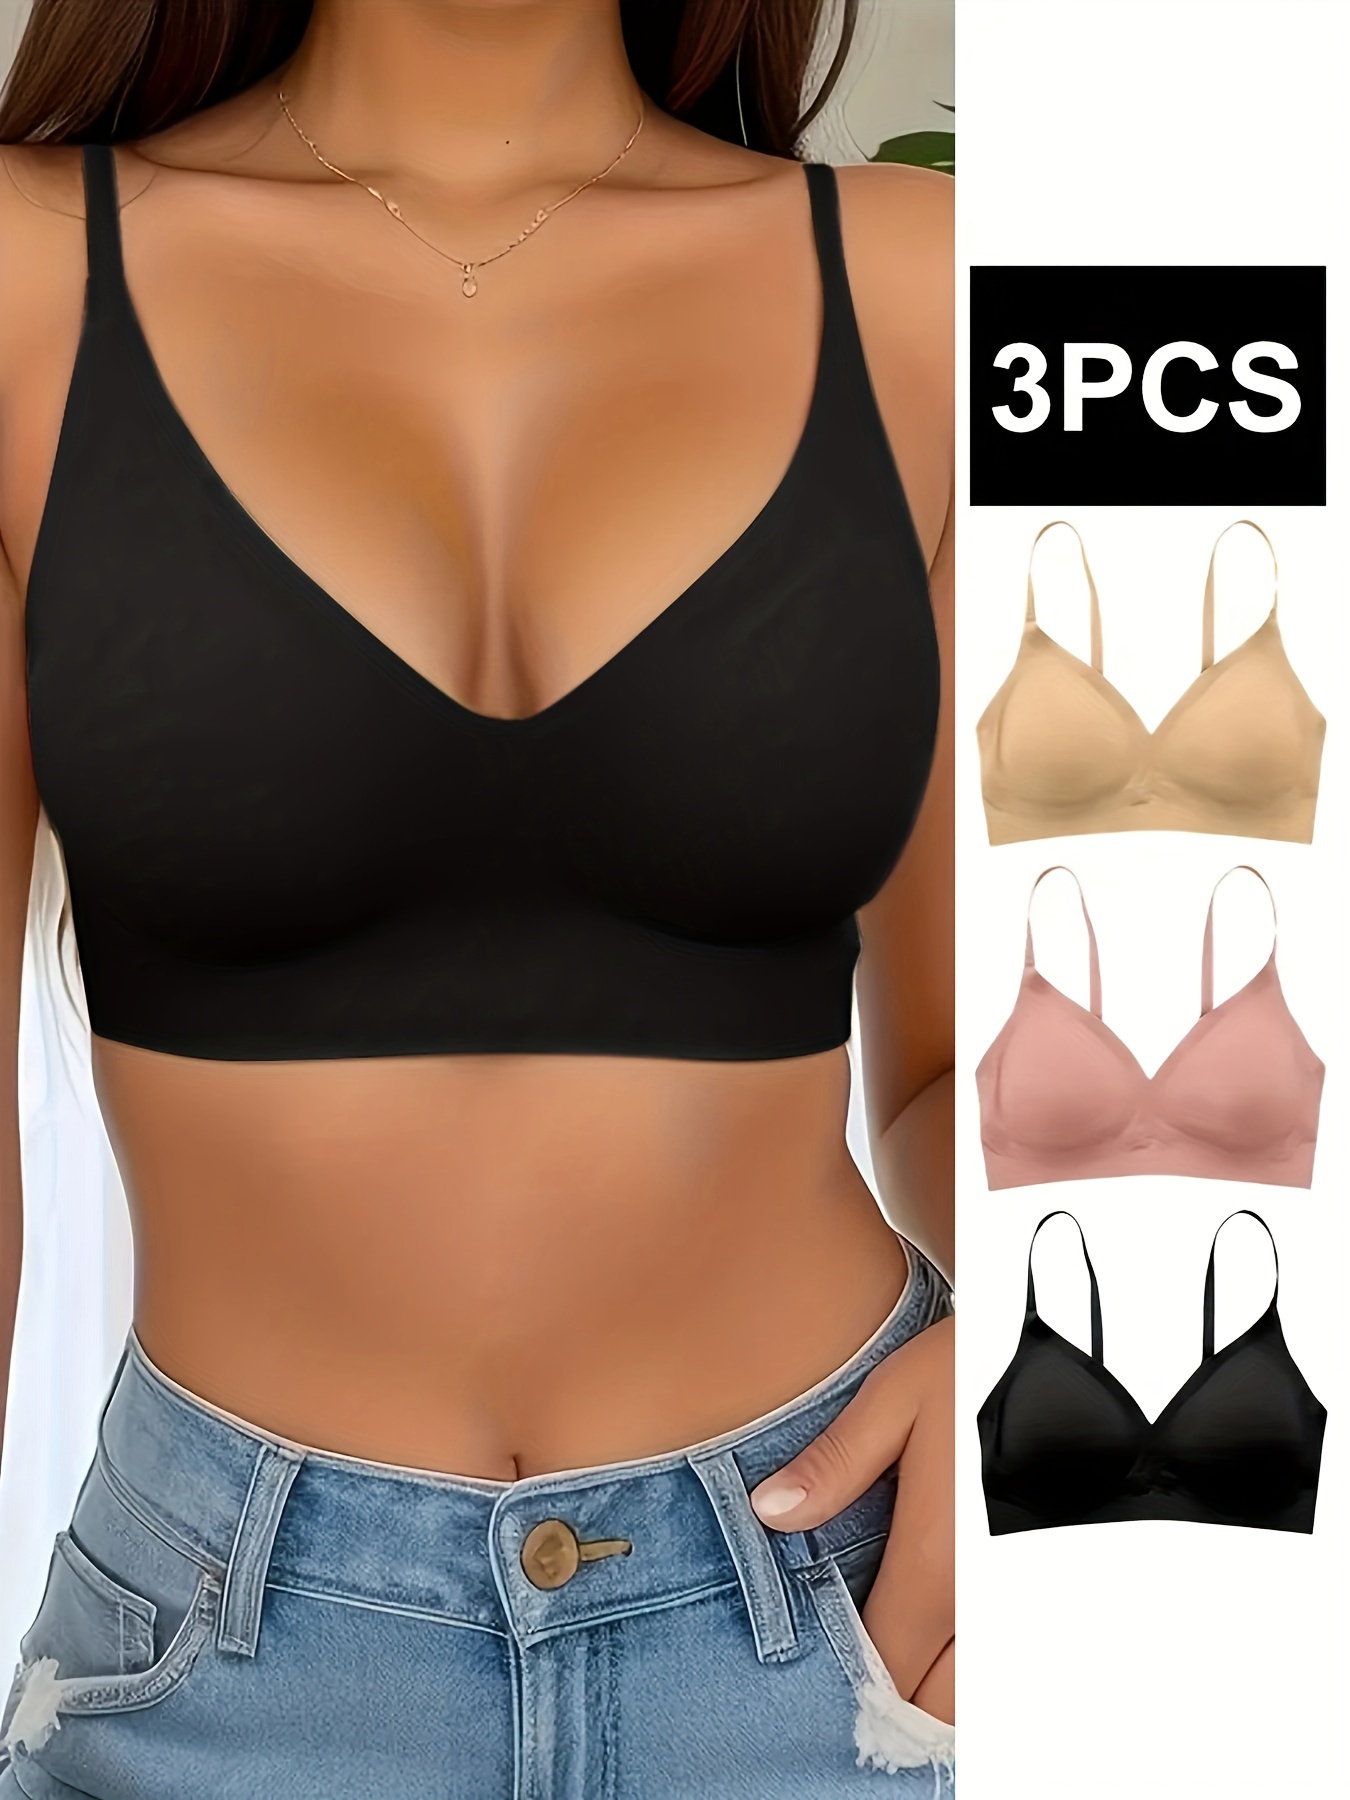 3pcs Seamless Solid Wireless Bras, Comfy & Breathable Push Up Intimates  Bra, Women's Lingerie & Underwear